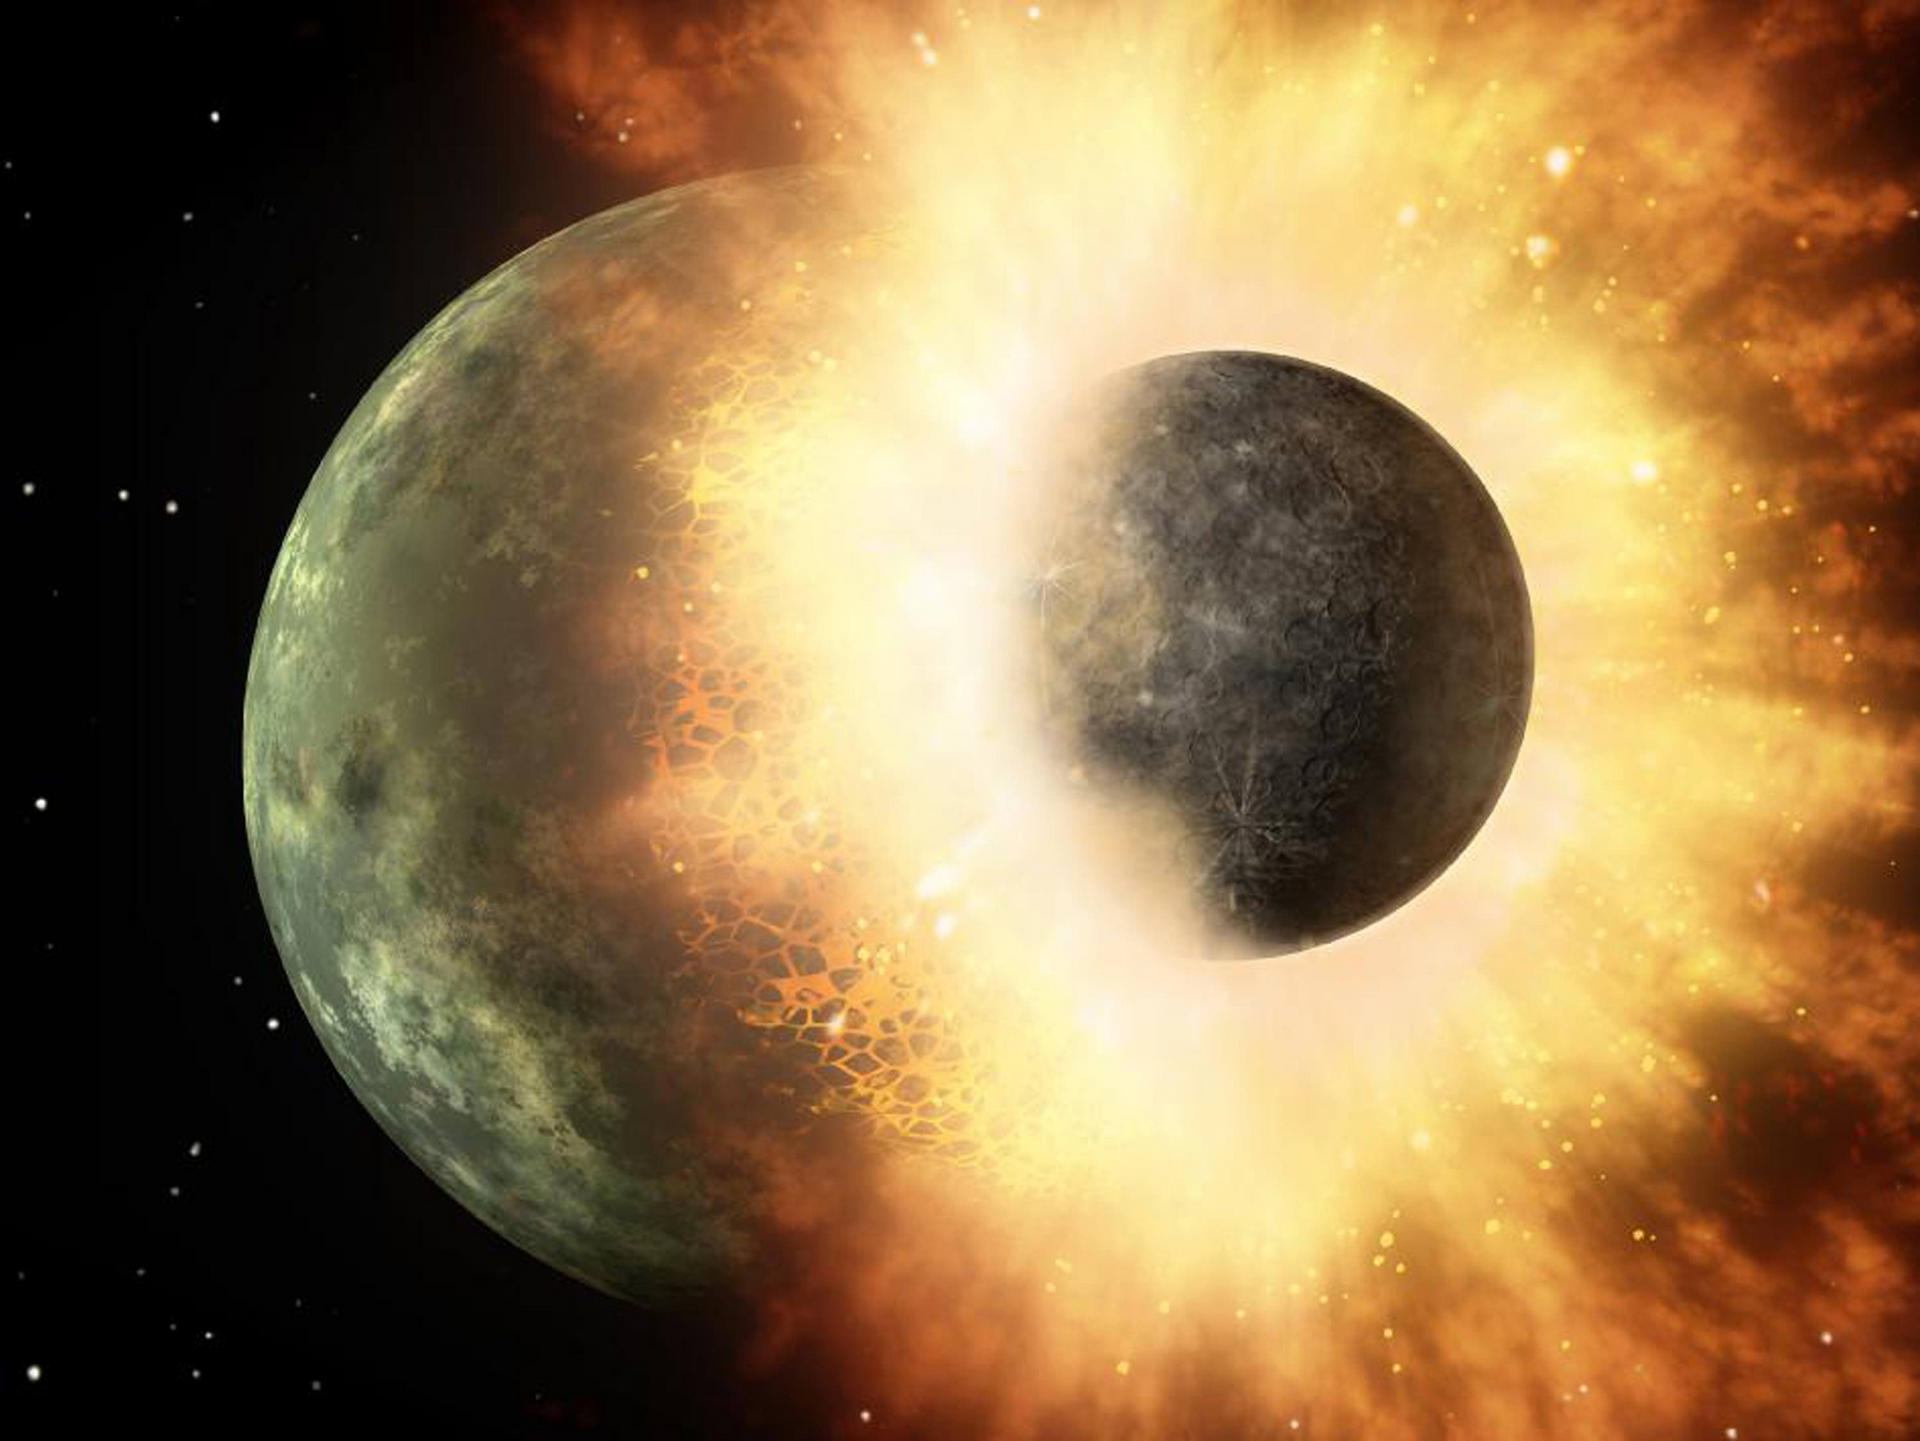 Depiction of a moon slamming into a planet. Photo: SCMP